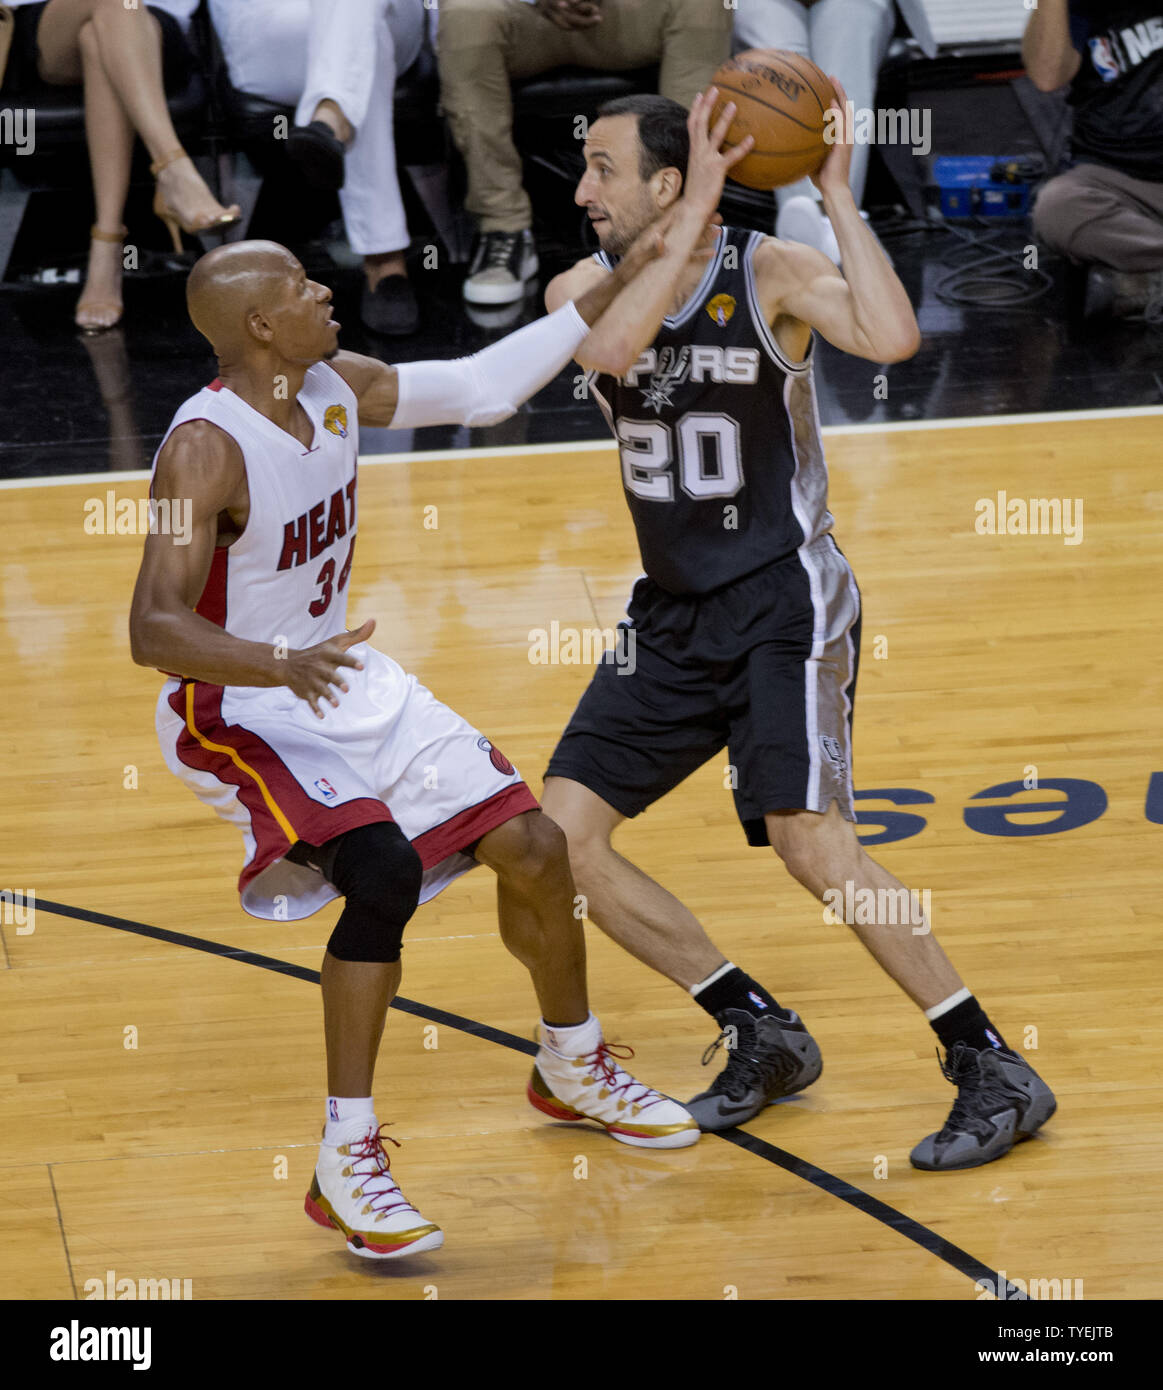 San Antonio Spurs Manu Ginobili (20) moves the ball against Miami Heat Ray Allen (34) in game 3 of the NBA Finals at the American Airlines Arena in Miami on June 10, 2014. The Spurs defeated the Heat 111-92 to take a 2 -1 game  lead in the best of seven series.    UPI/Gary I Rothstein Stock Photo